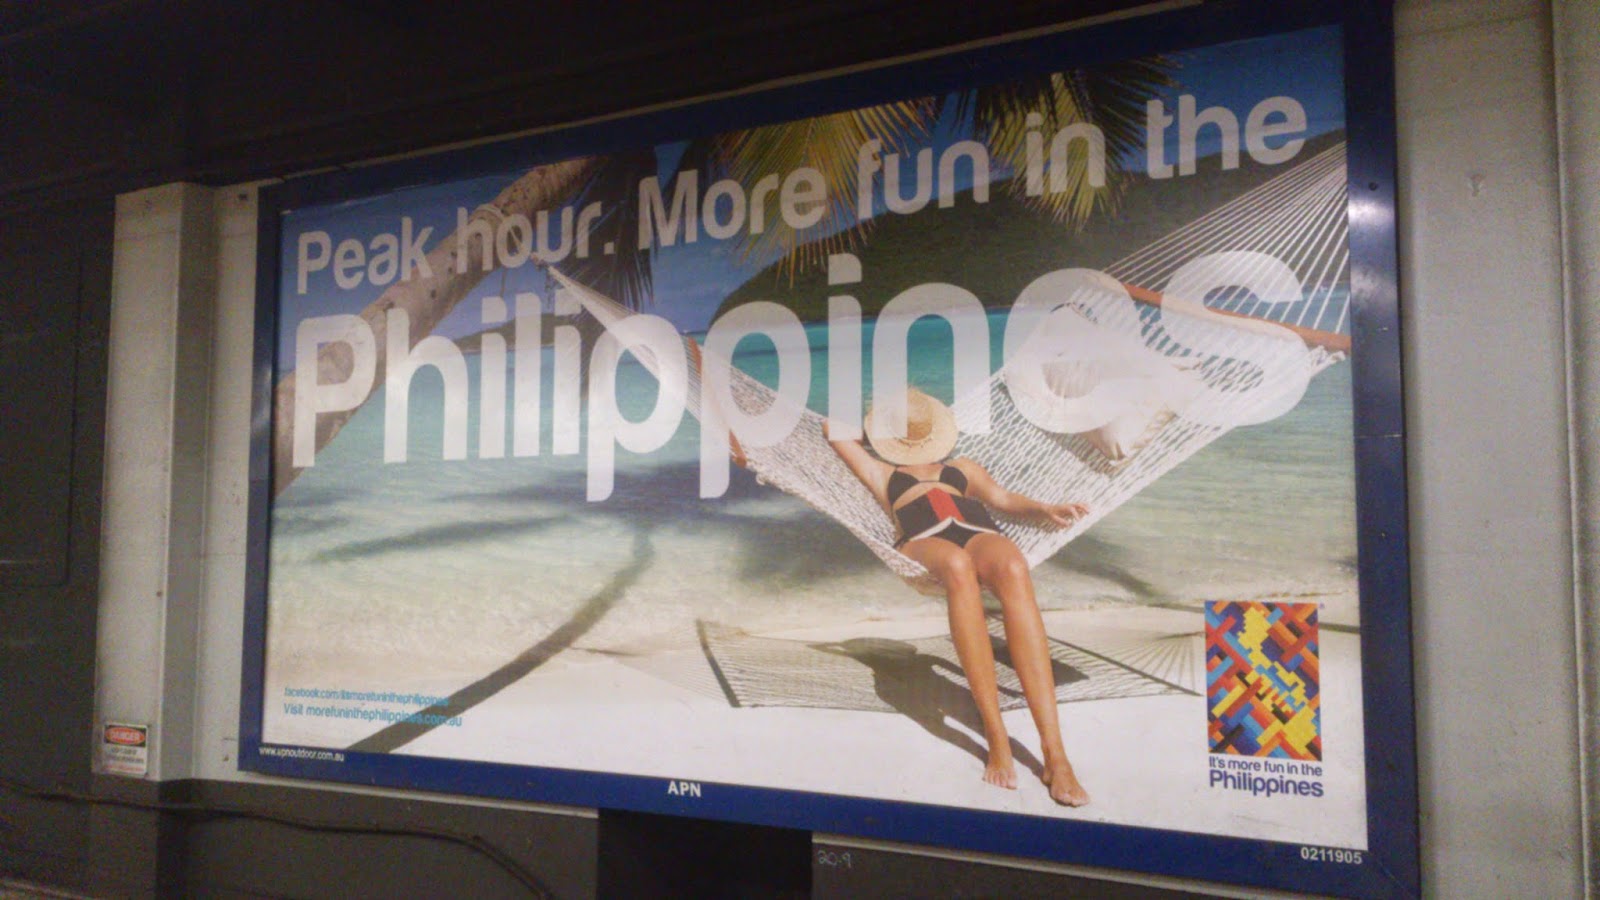 Its more Fun in the Philippines